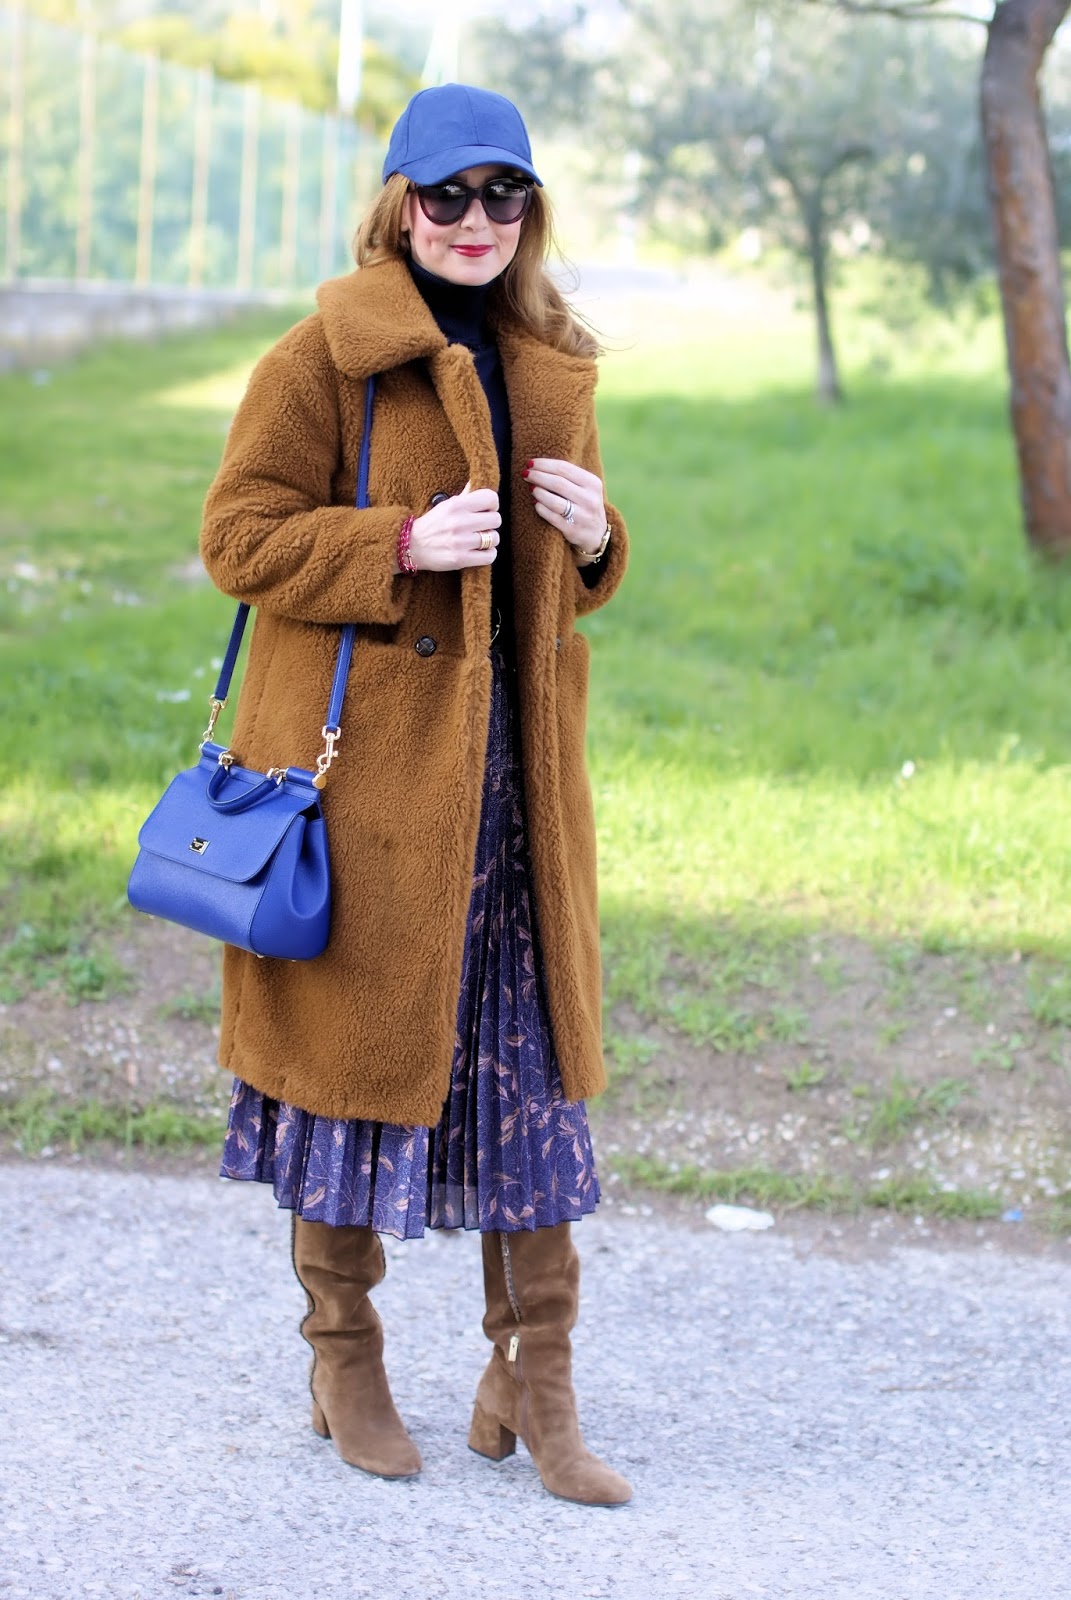 The Teddy Bear Coat trend on Fashion and Cookies international fashion blog